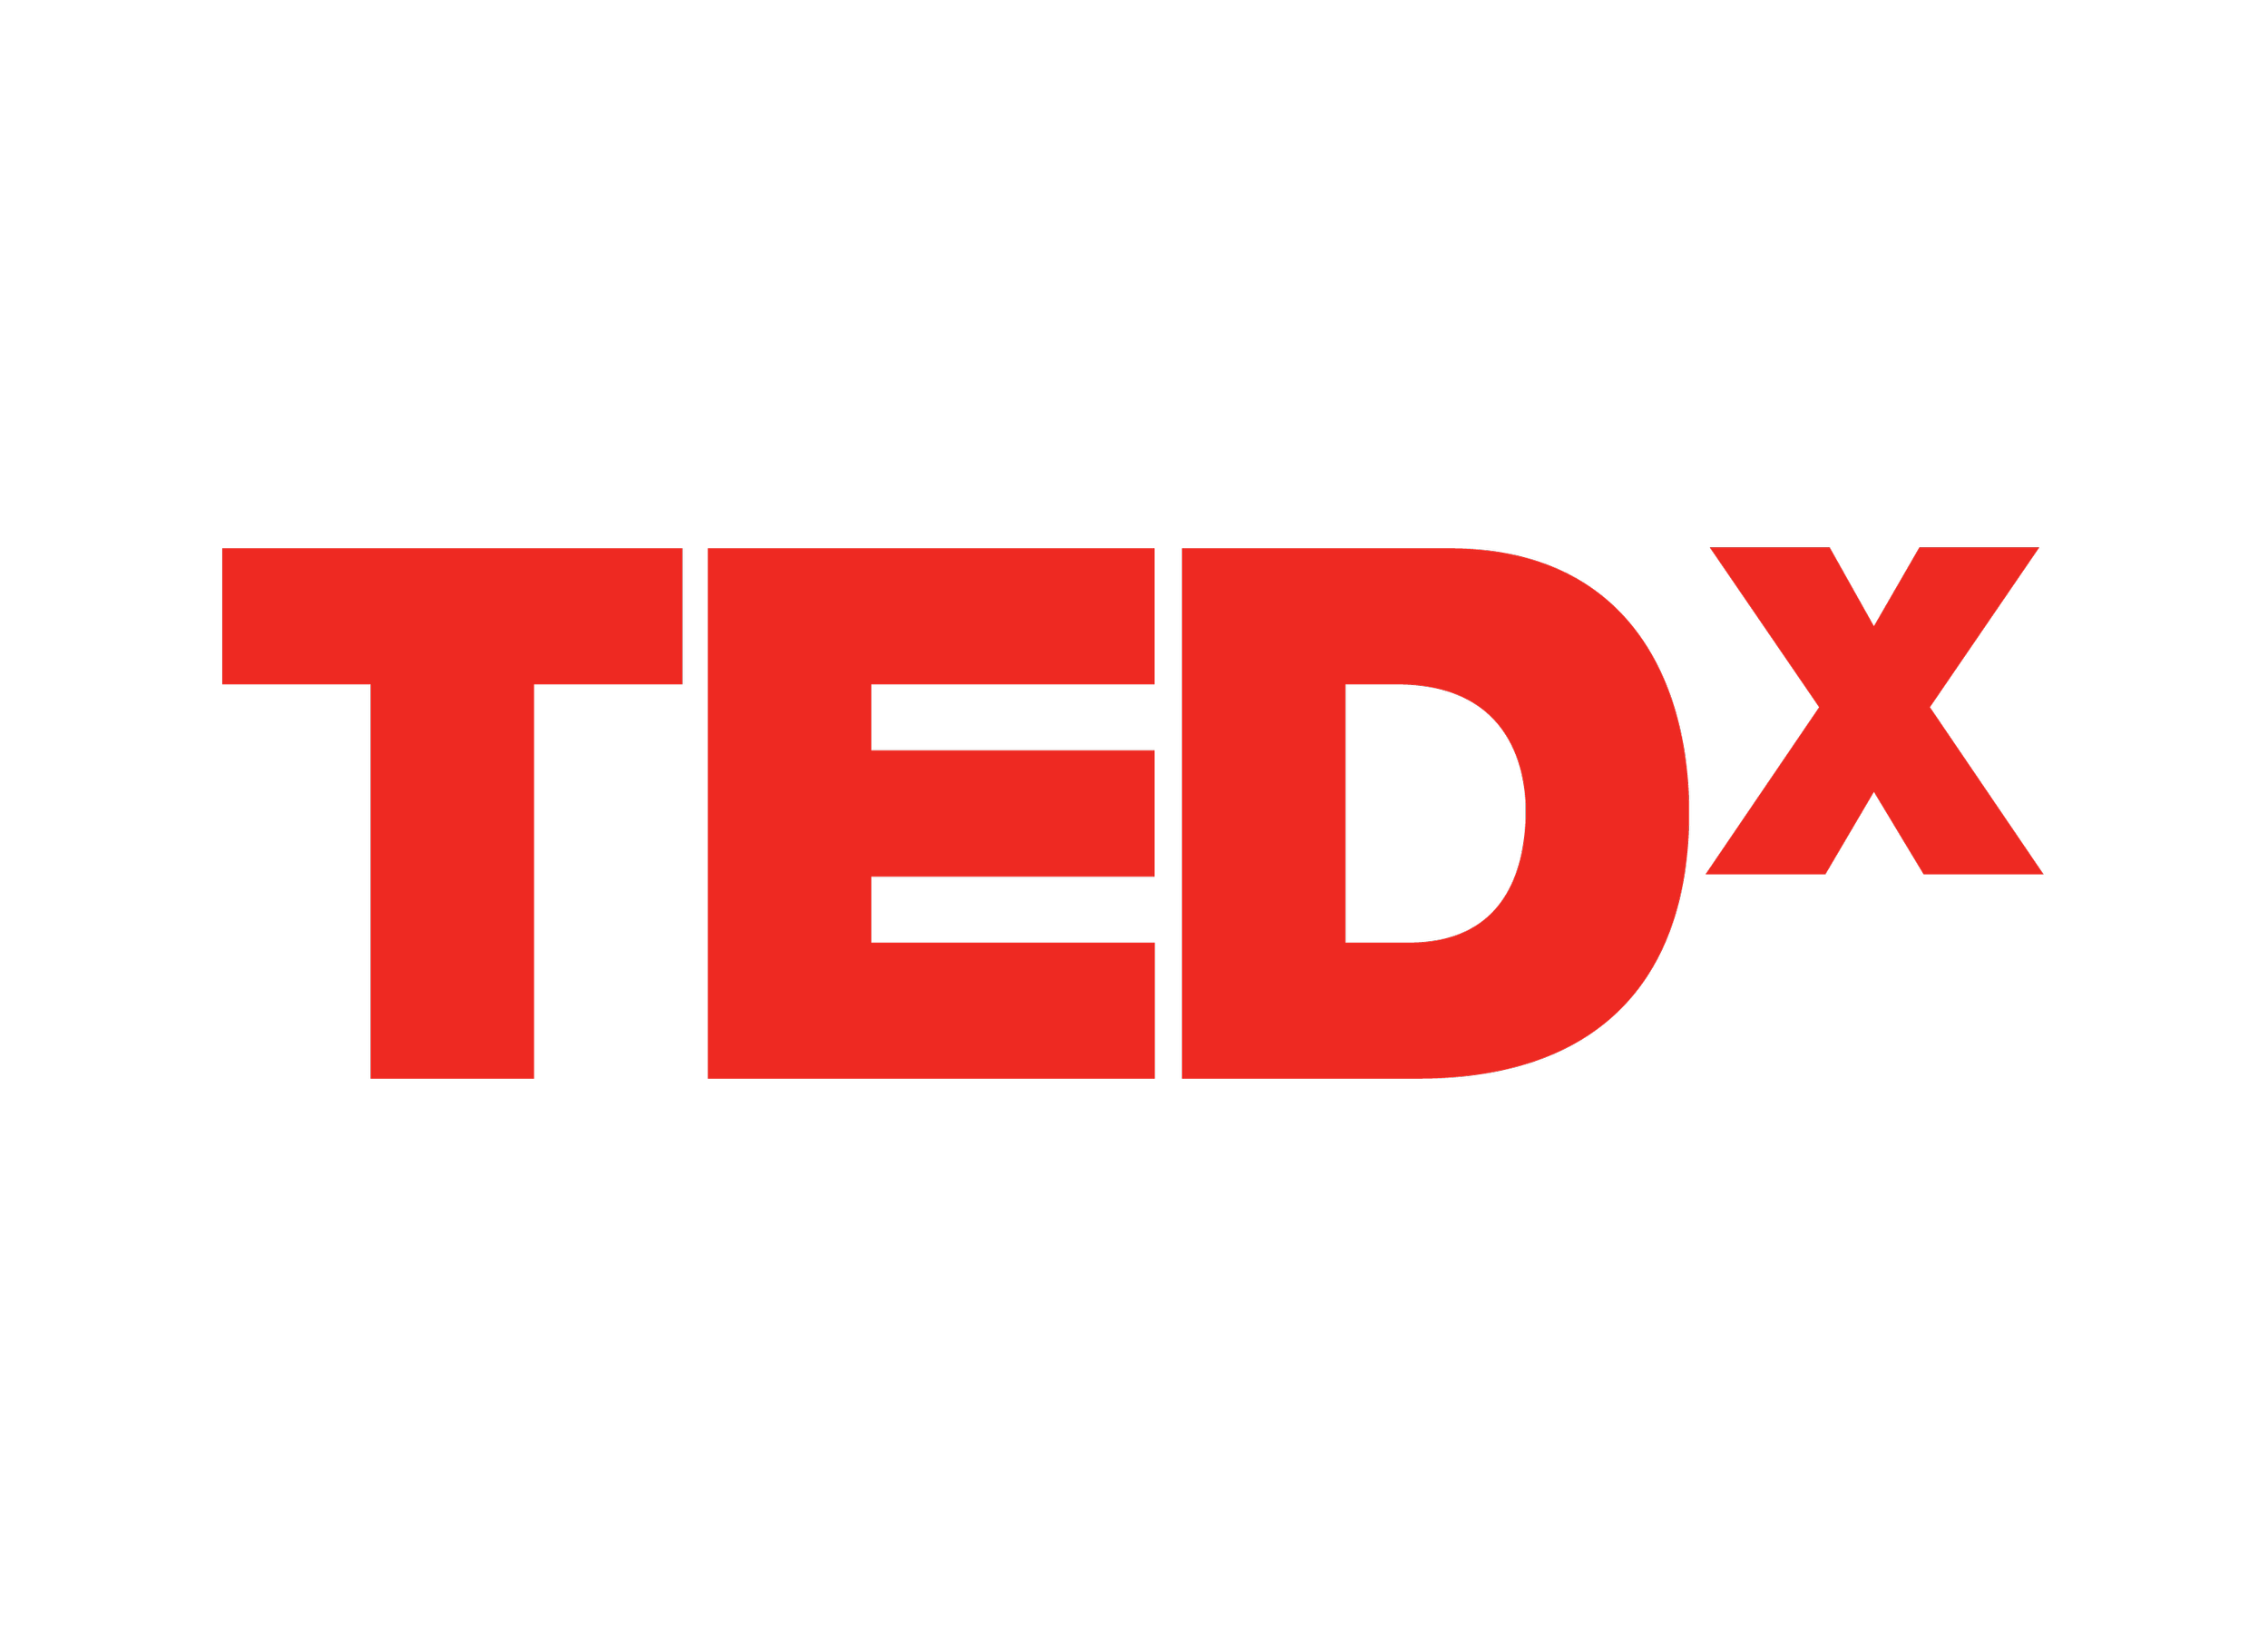 TEDX.png